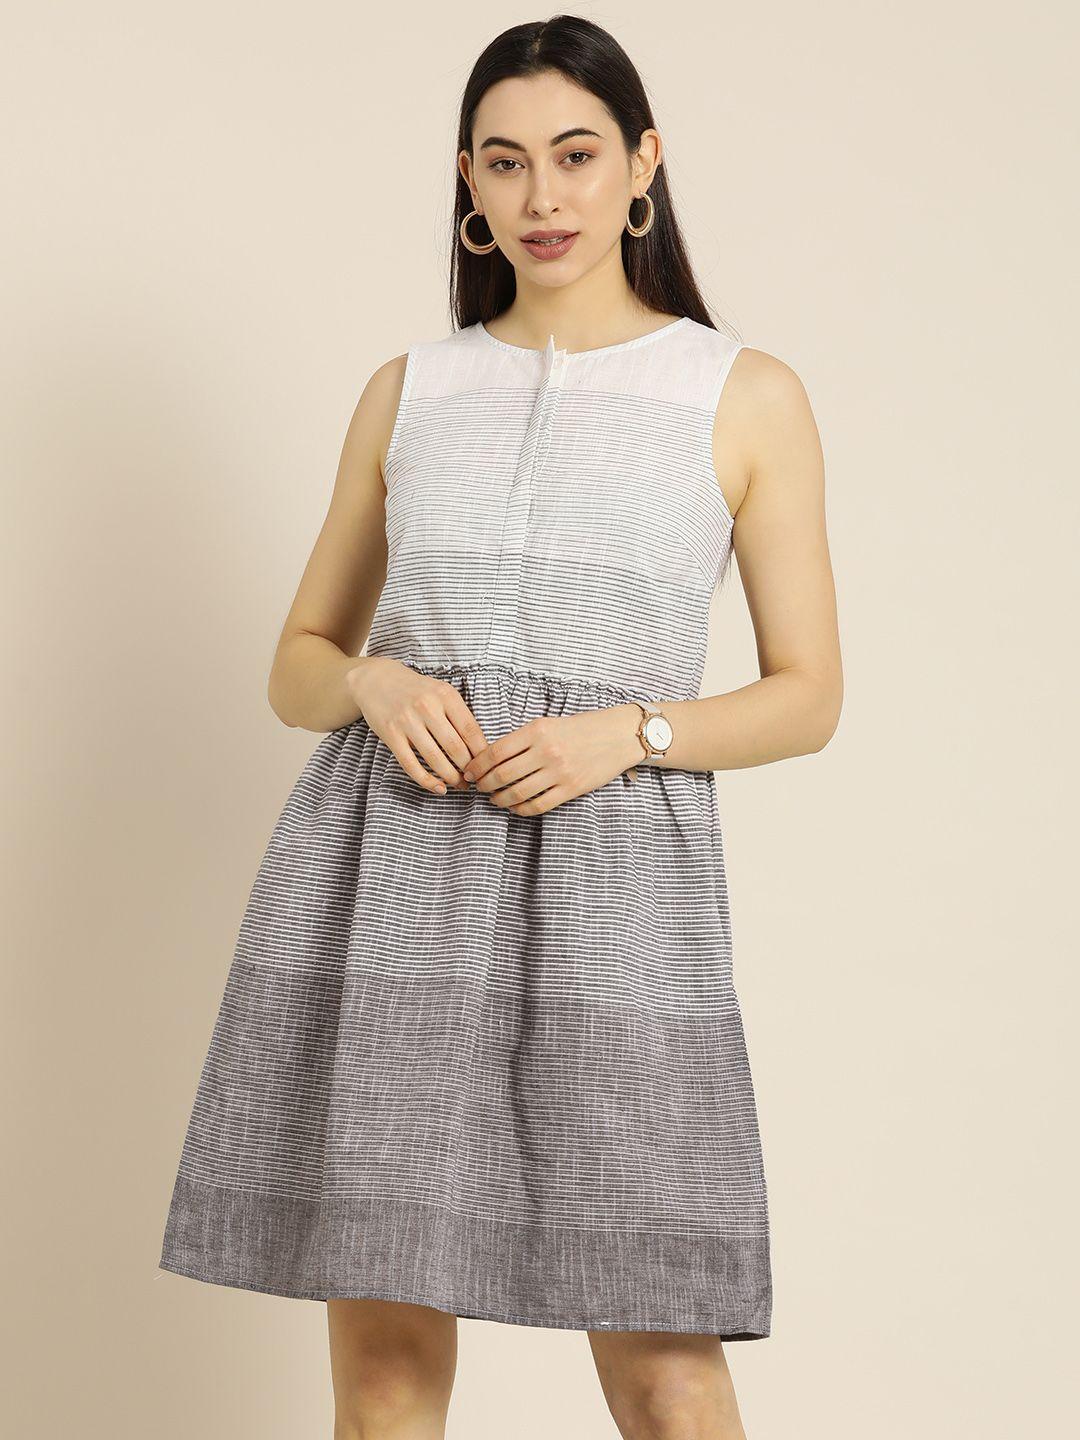 ether kora collection women white & grey striped handloom sustainable a-line dress